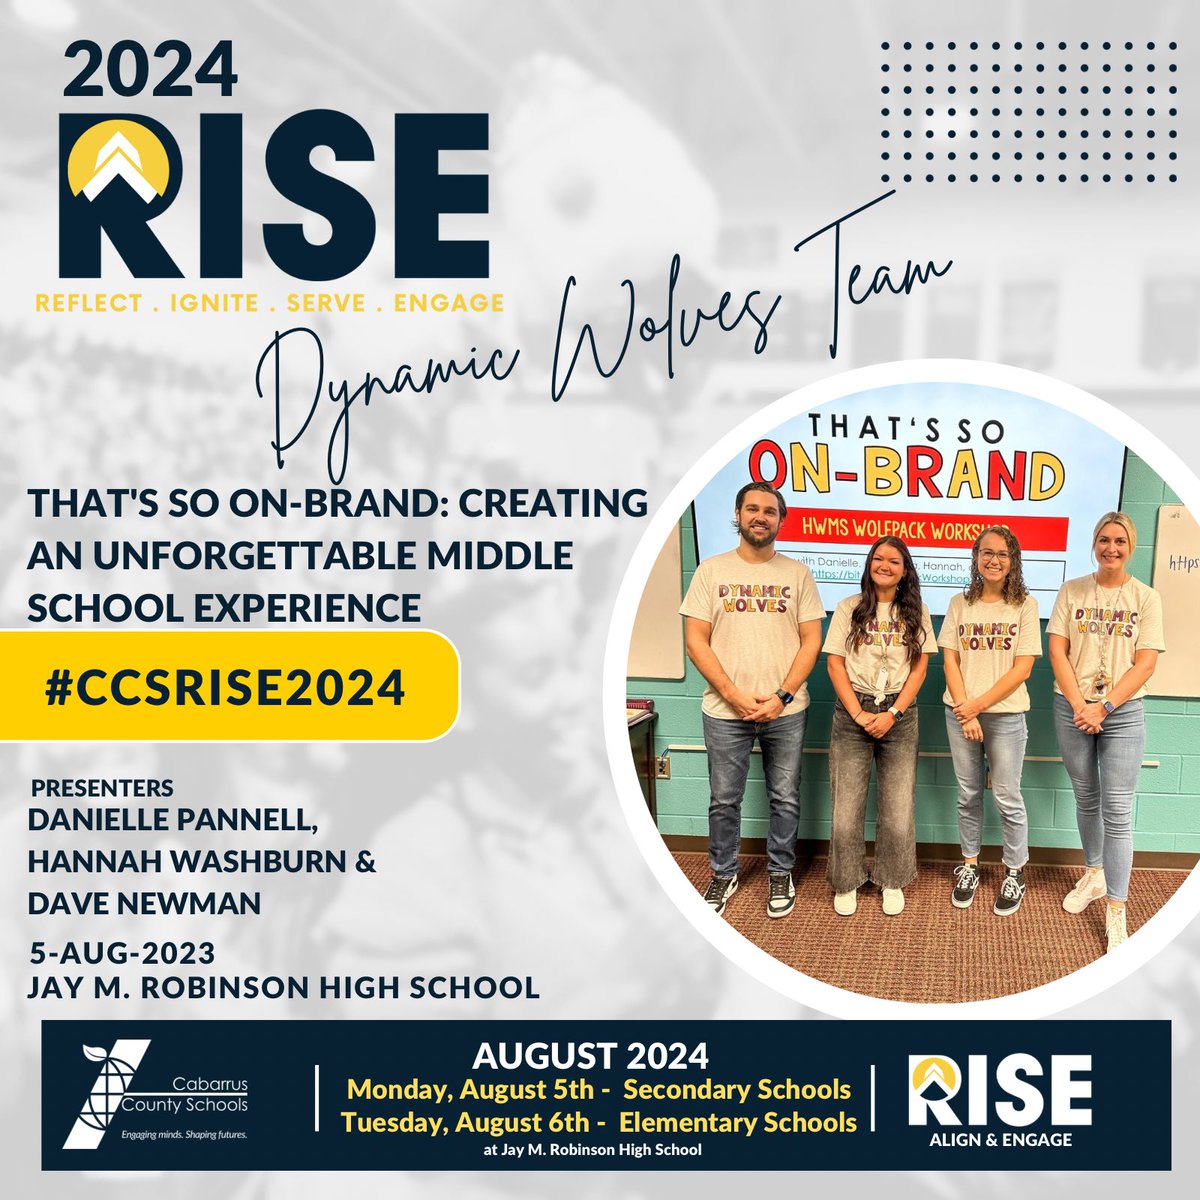 Excited to present at RISE 2024! #CCSRise2024 #RunWithThePack 🐺